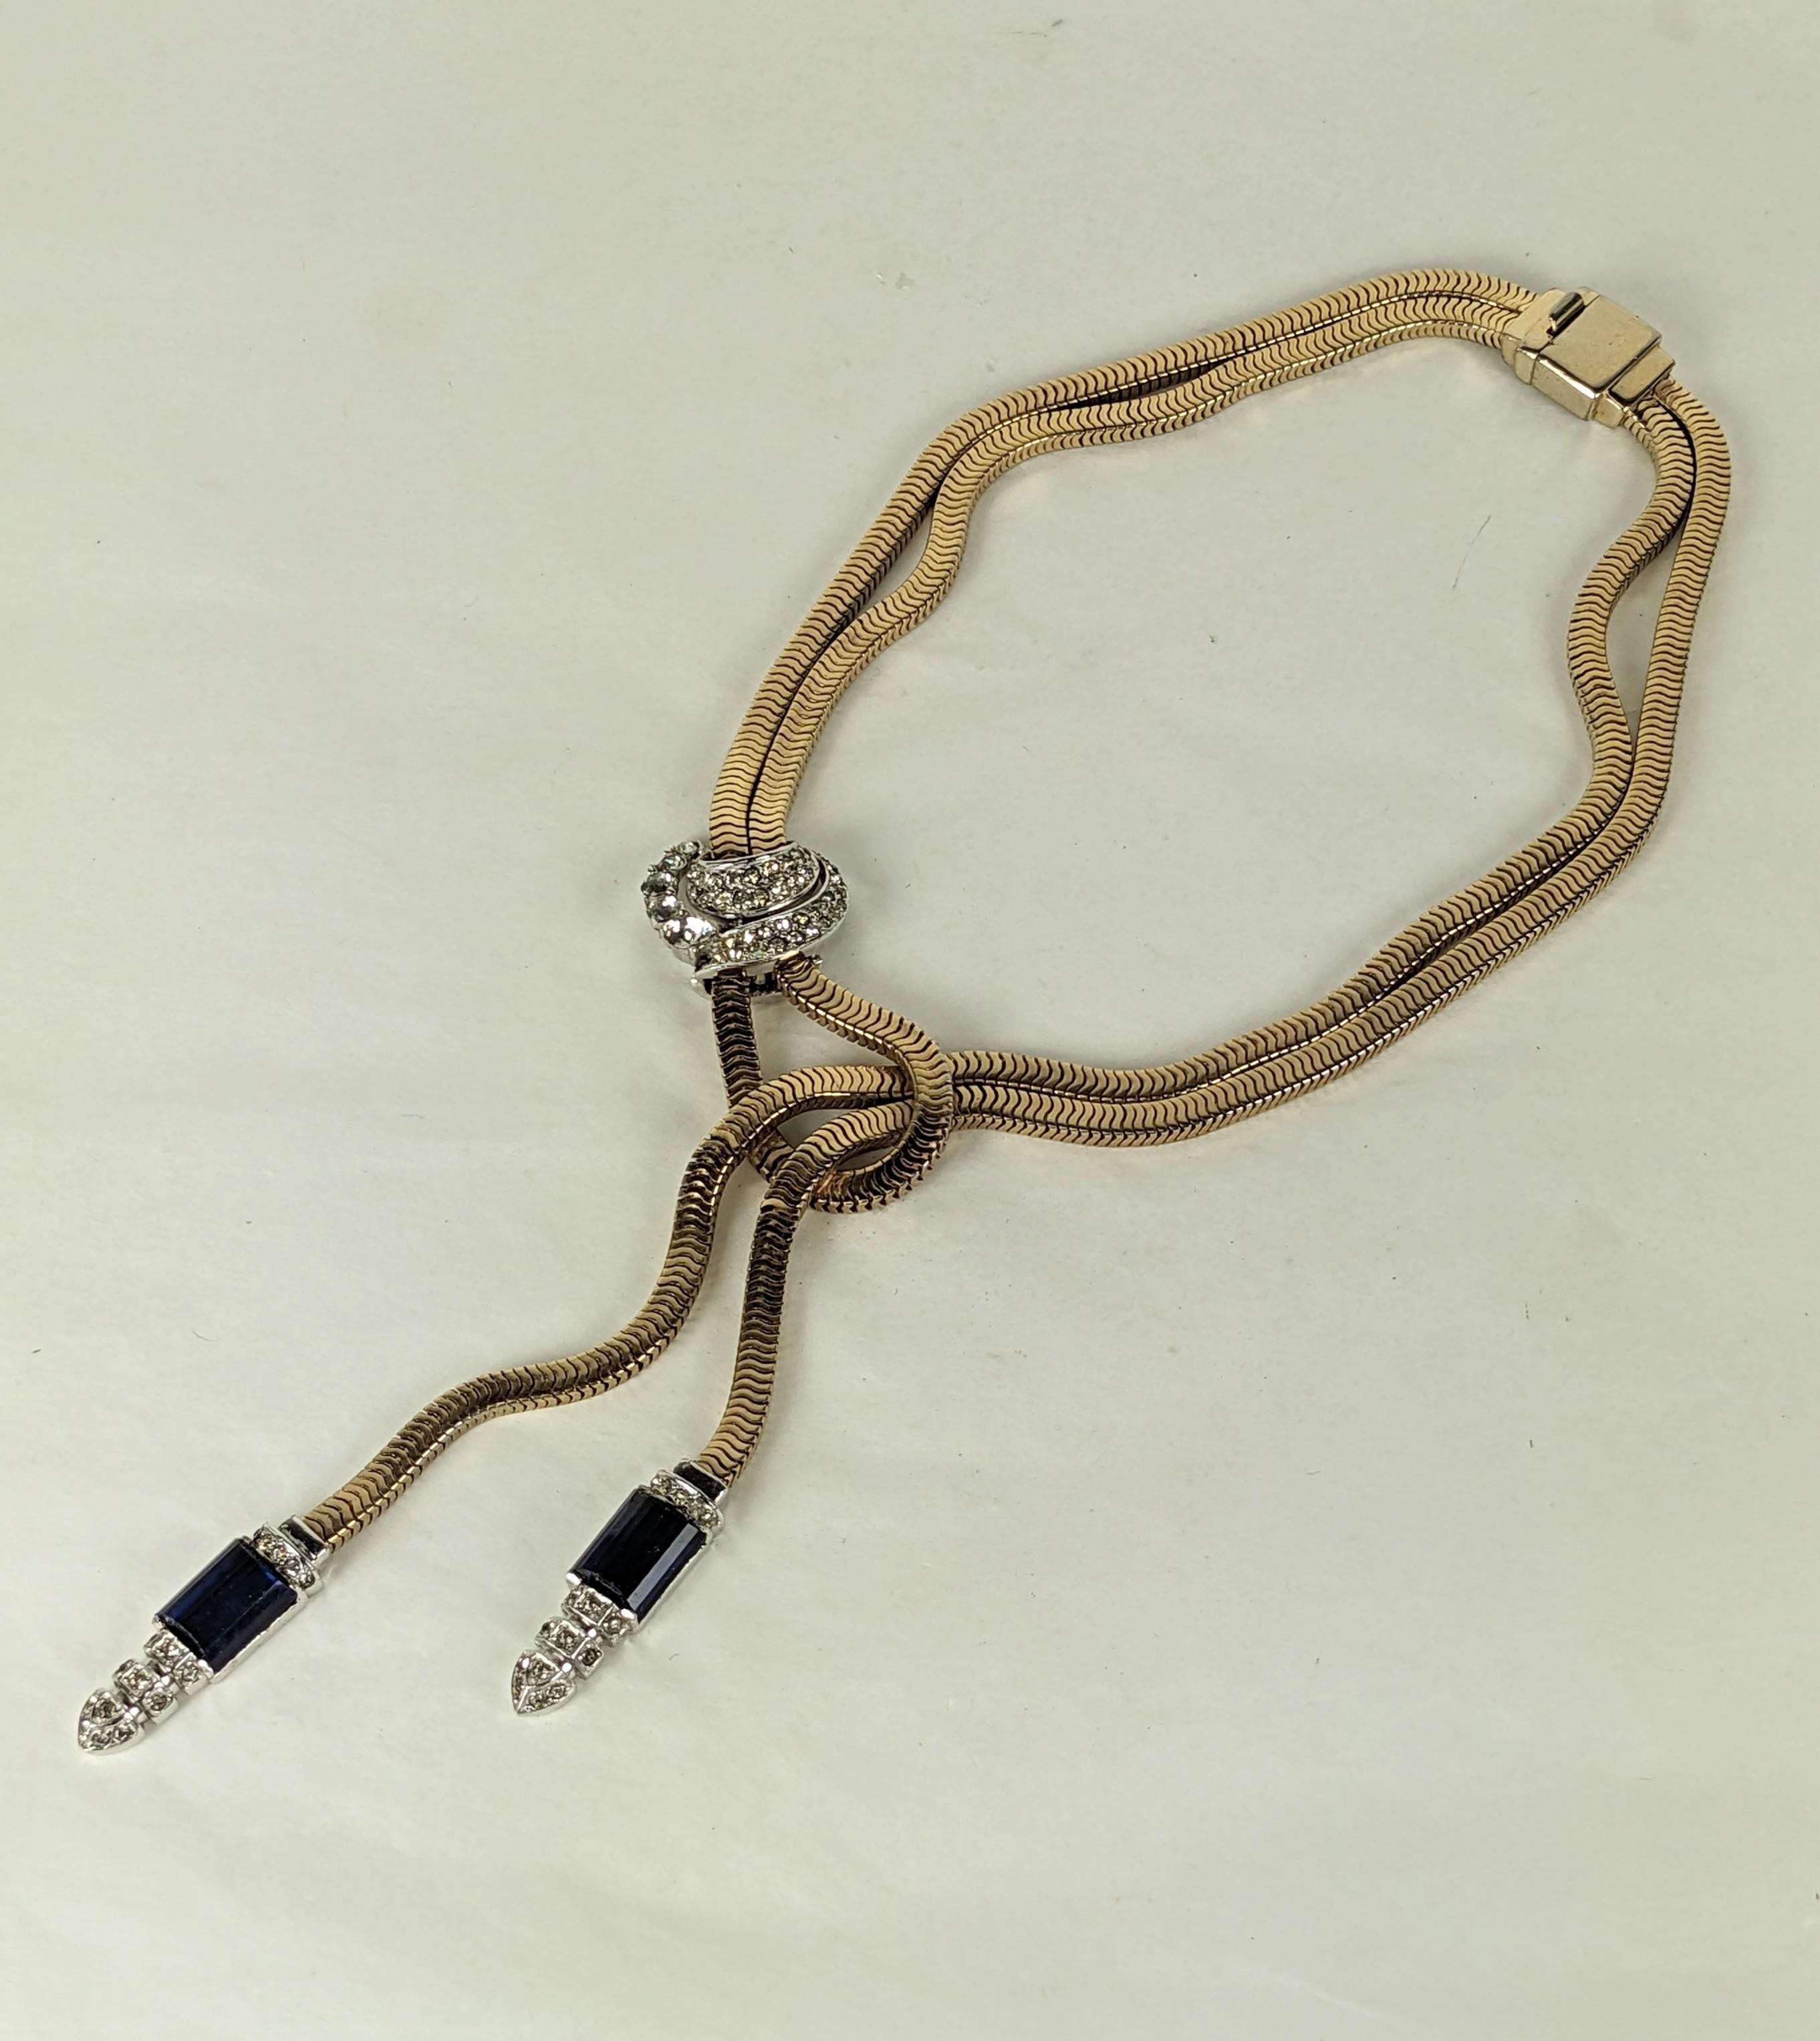 Amazing Marcel Boucher Retro Gas Pipe Pendant Necklace from the 1940's, Gilt gas pipe chain is looped and hold a pair of faux faceted sapphire and pave pendants. 
1940's USA. Early MB signature. Necklace 15